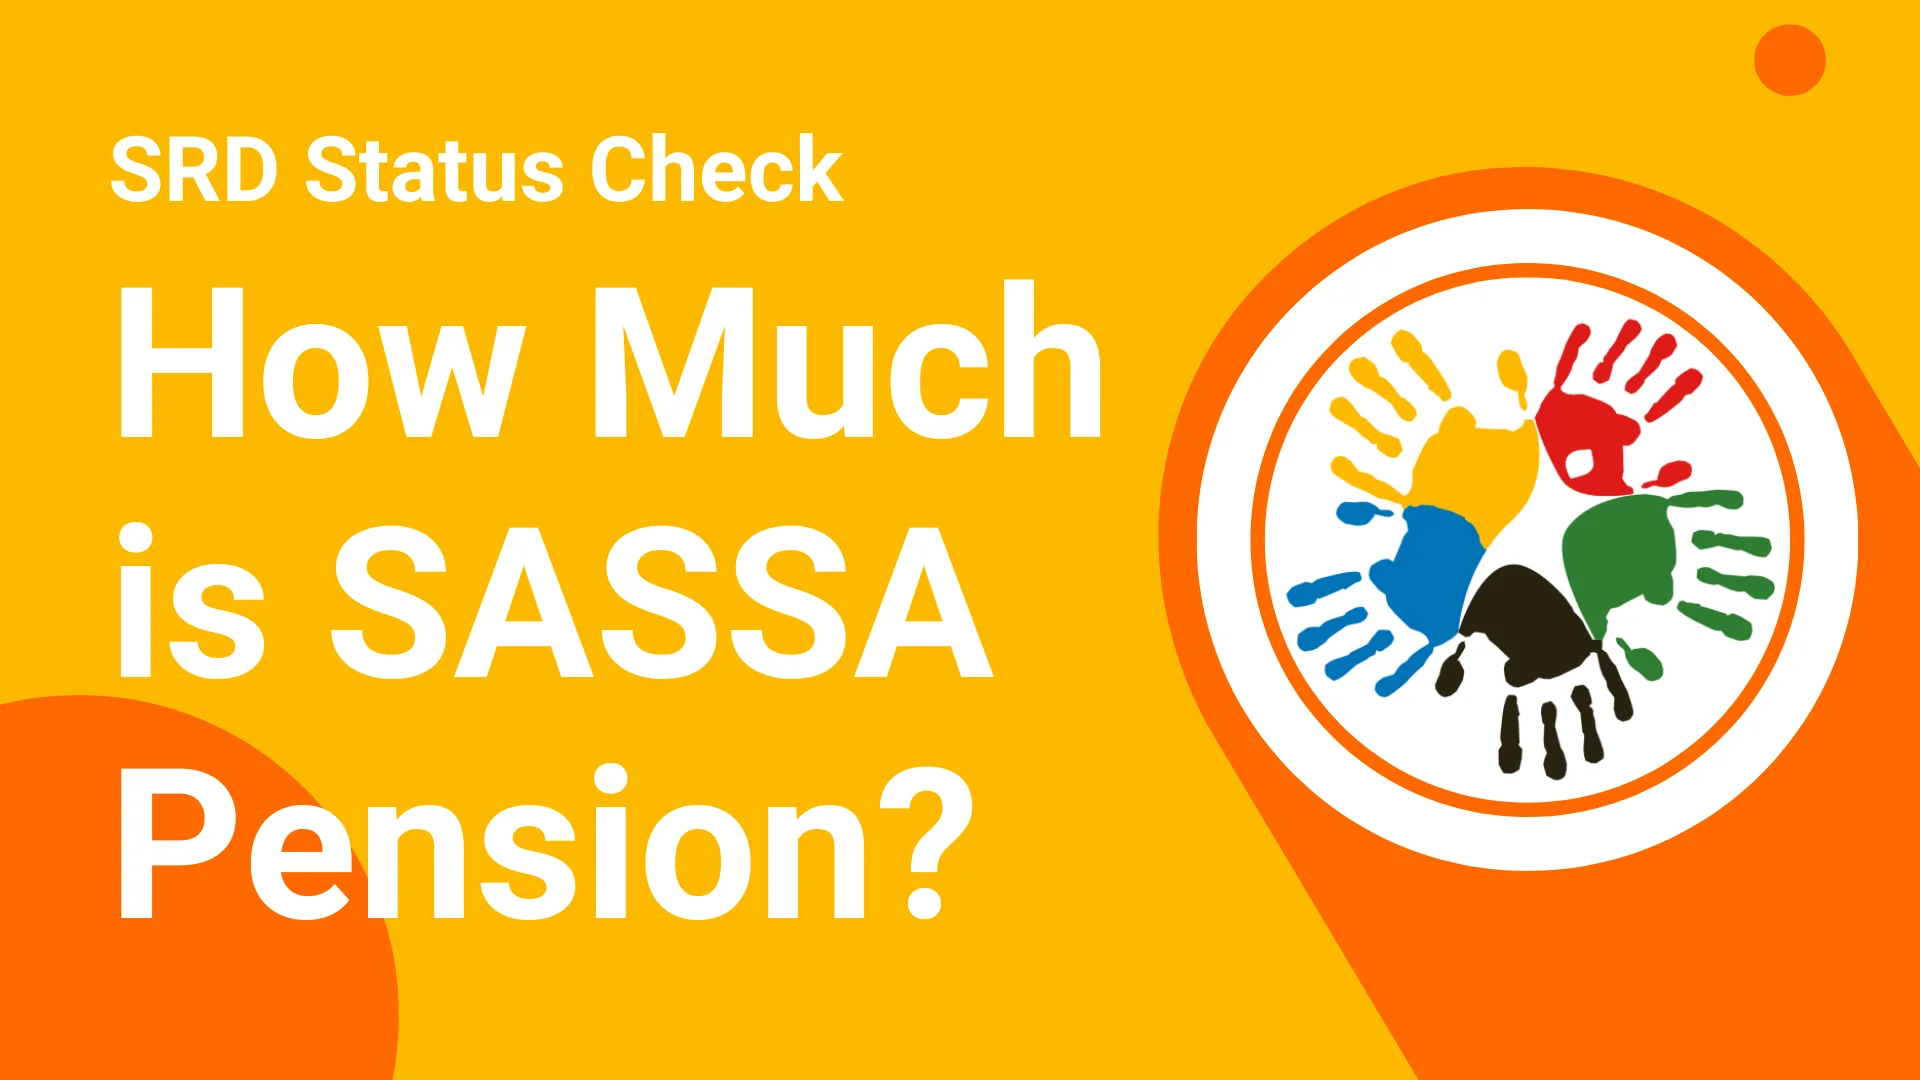 How Much is SASSA Pension